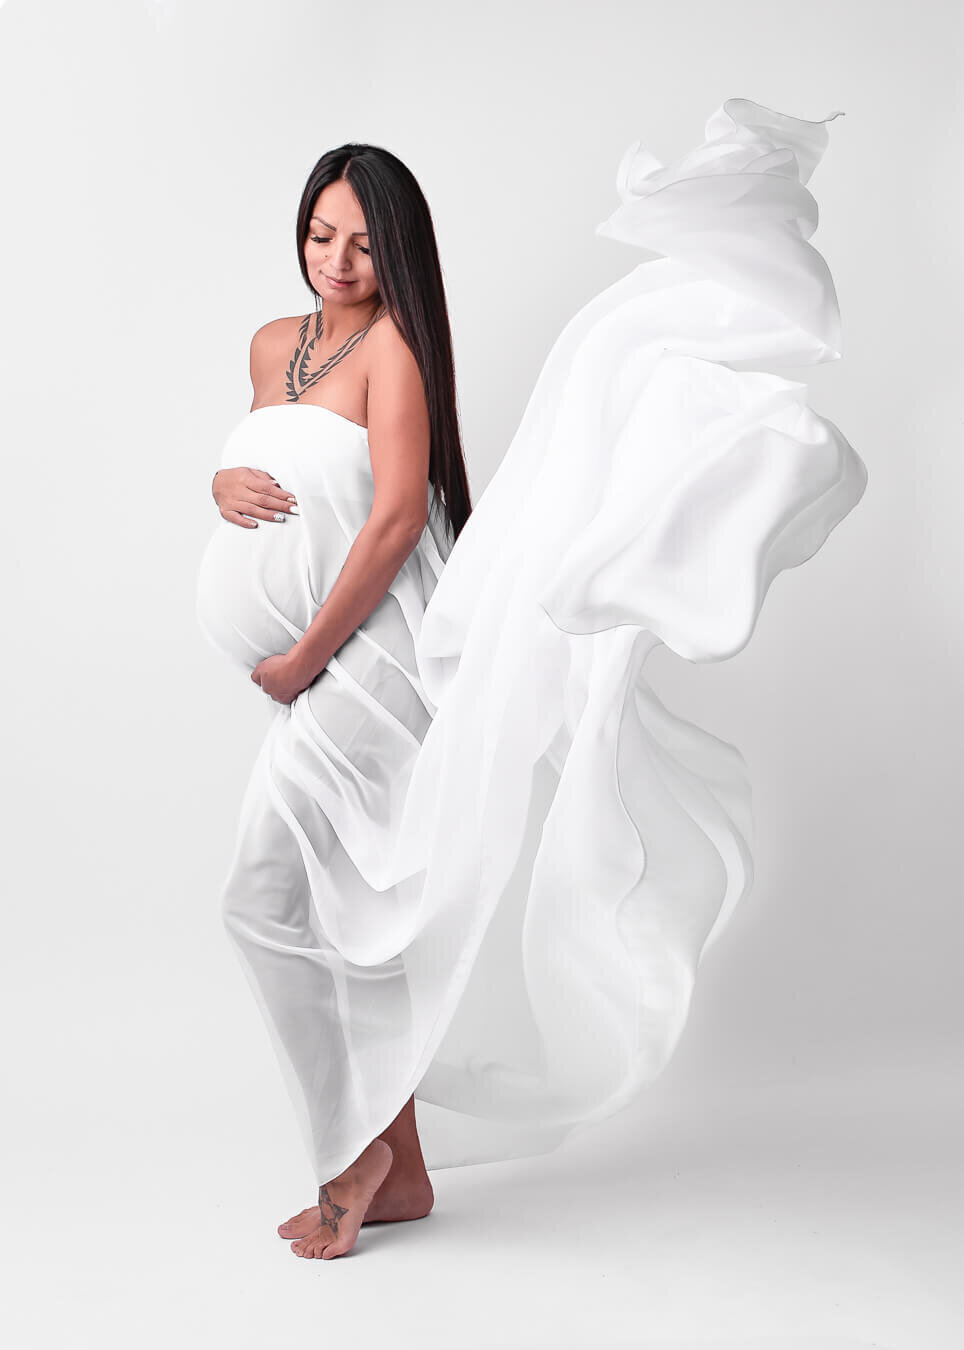 beautiful maternity portrait of woman draped with flowing fabric